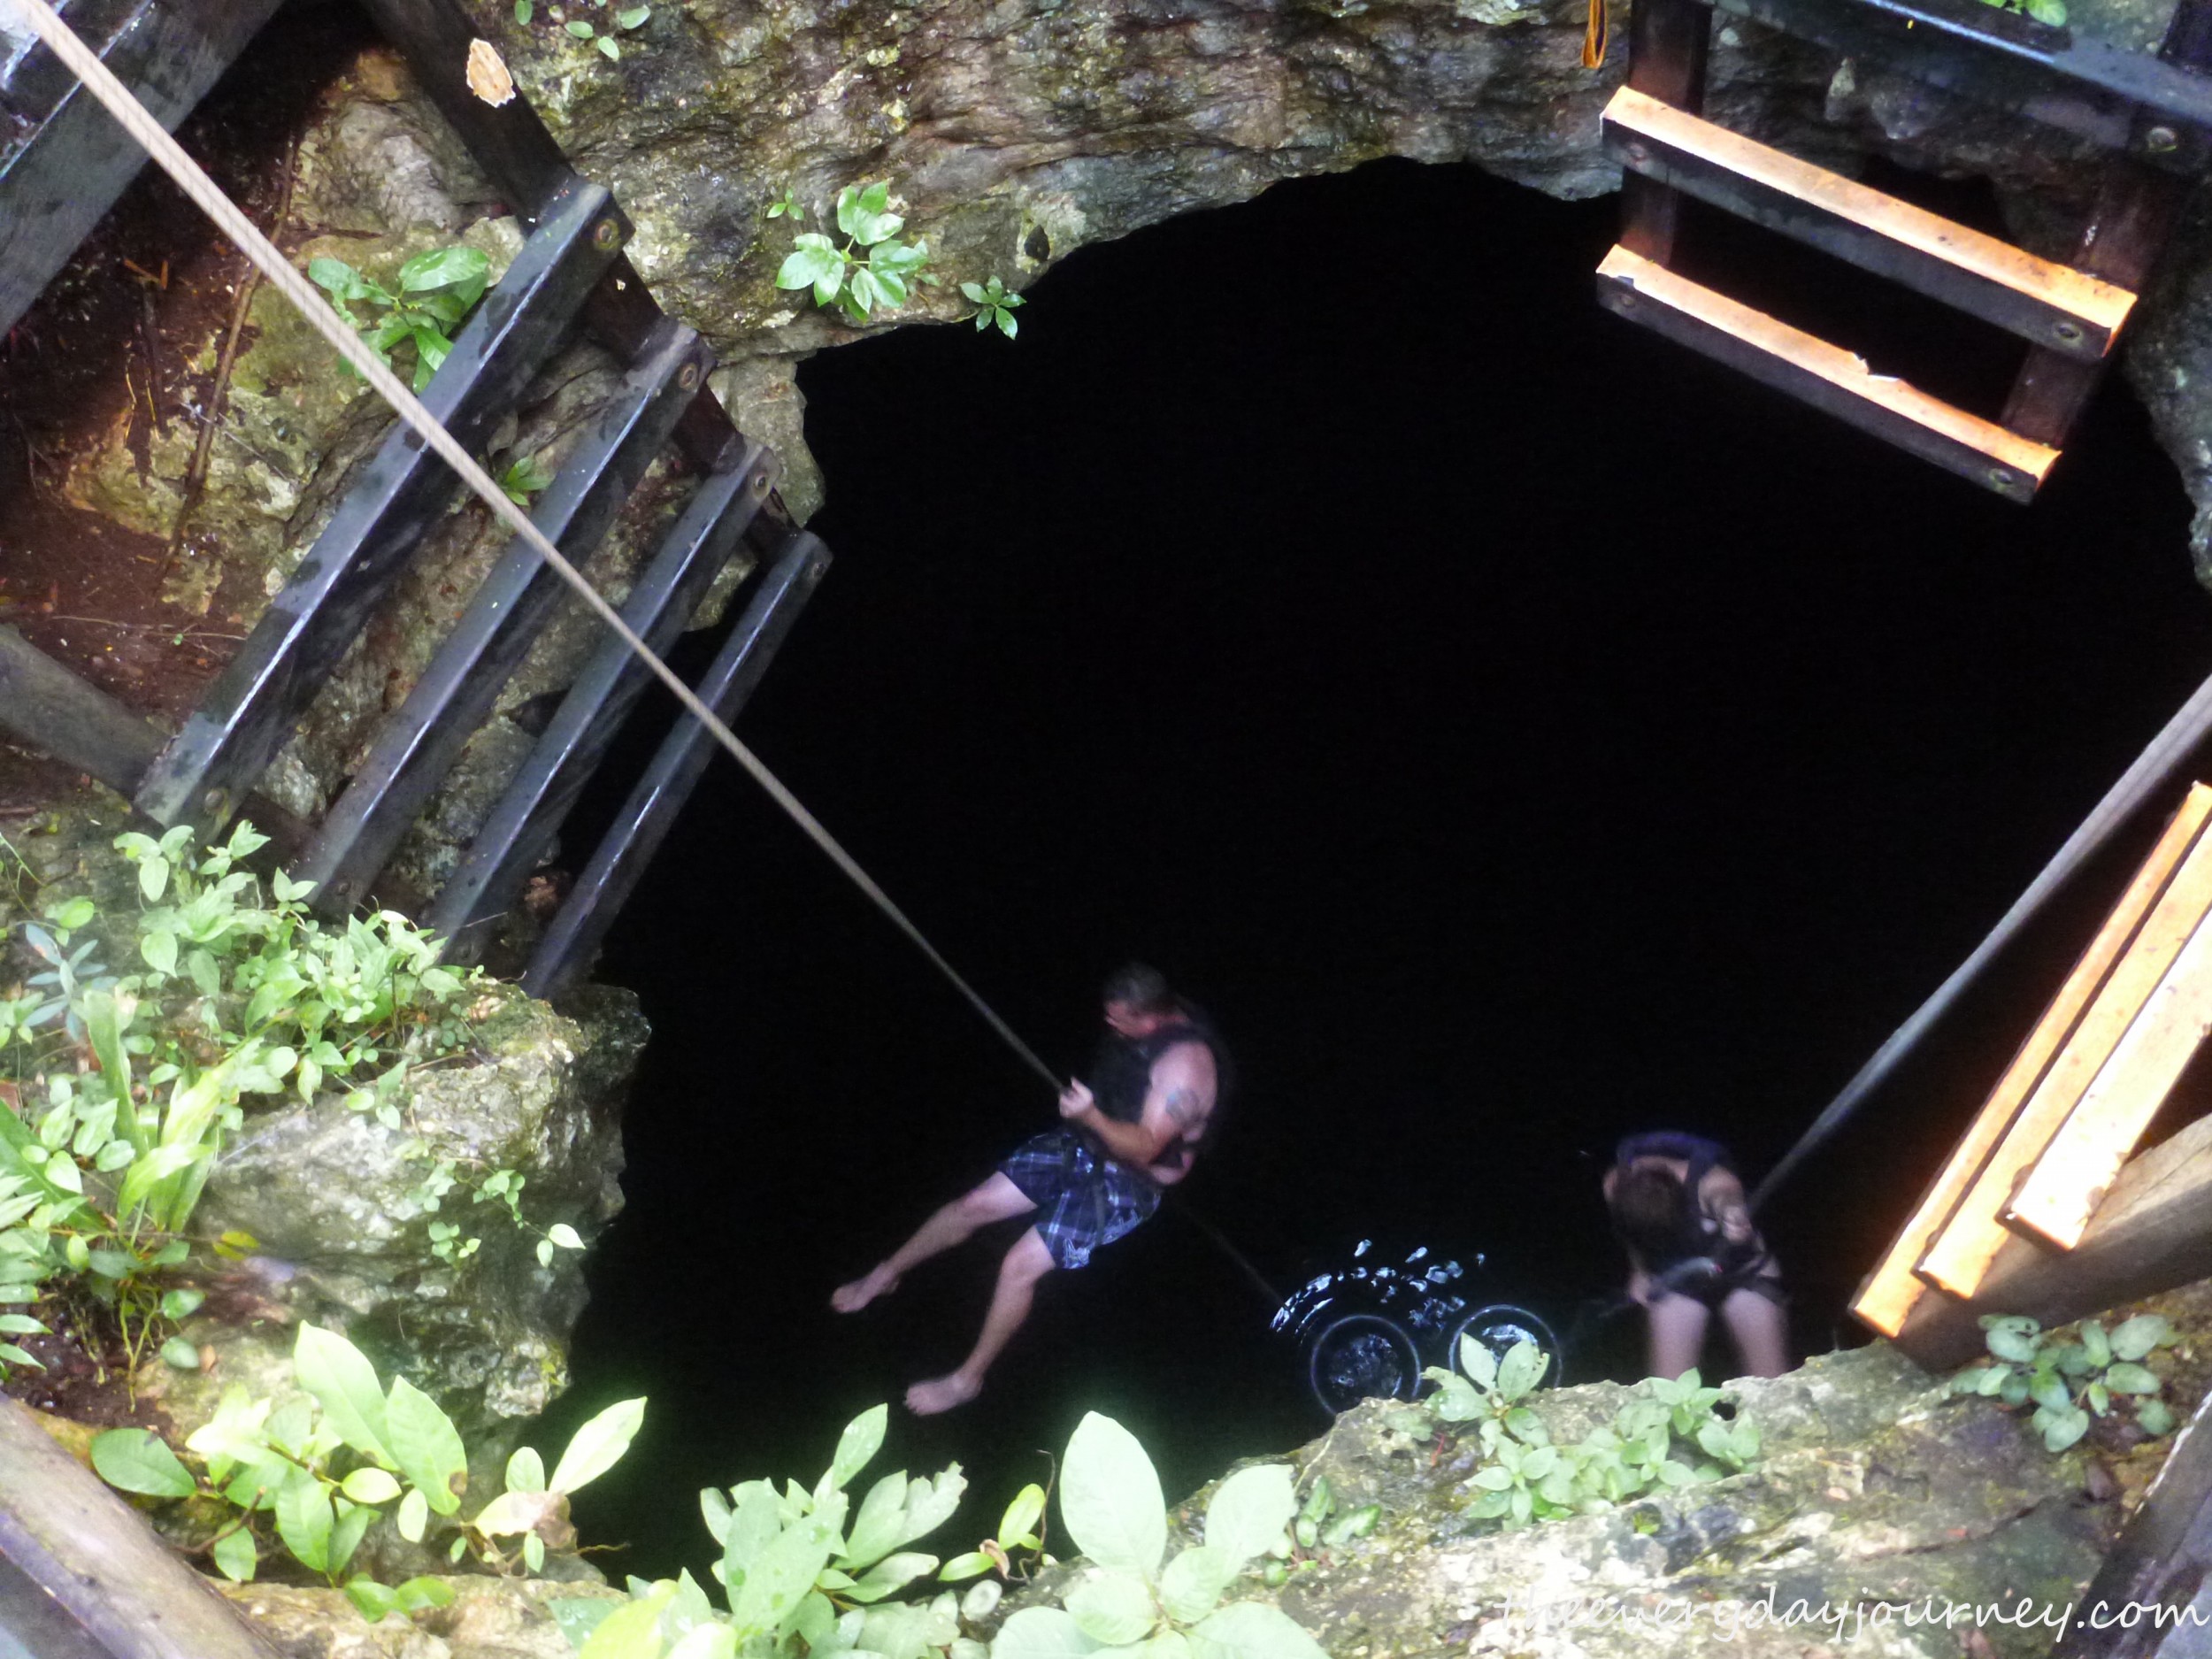 The view down into the cenote...not so sure about this.